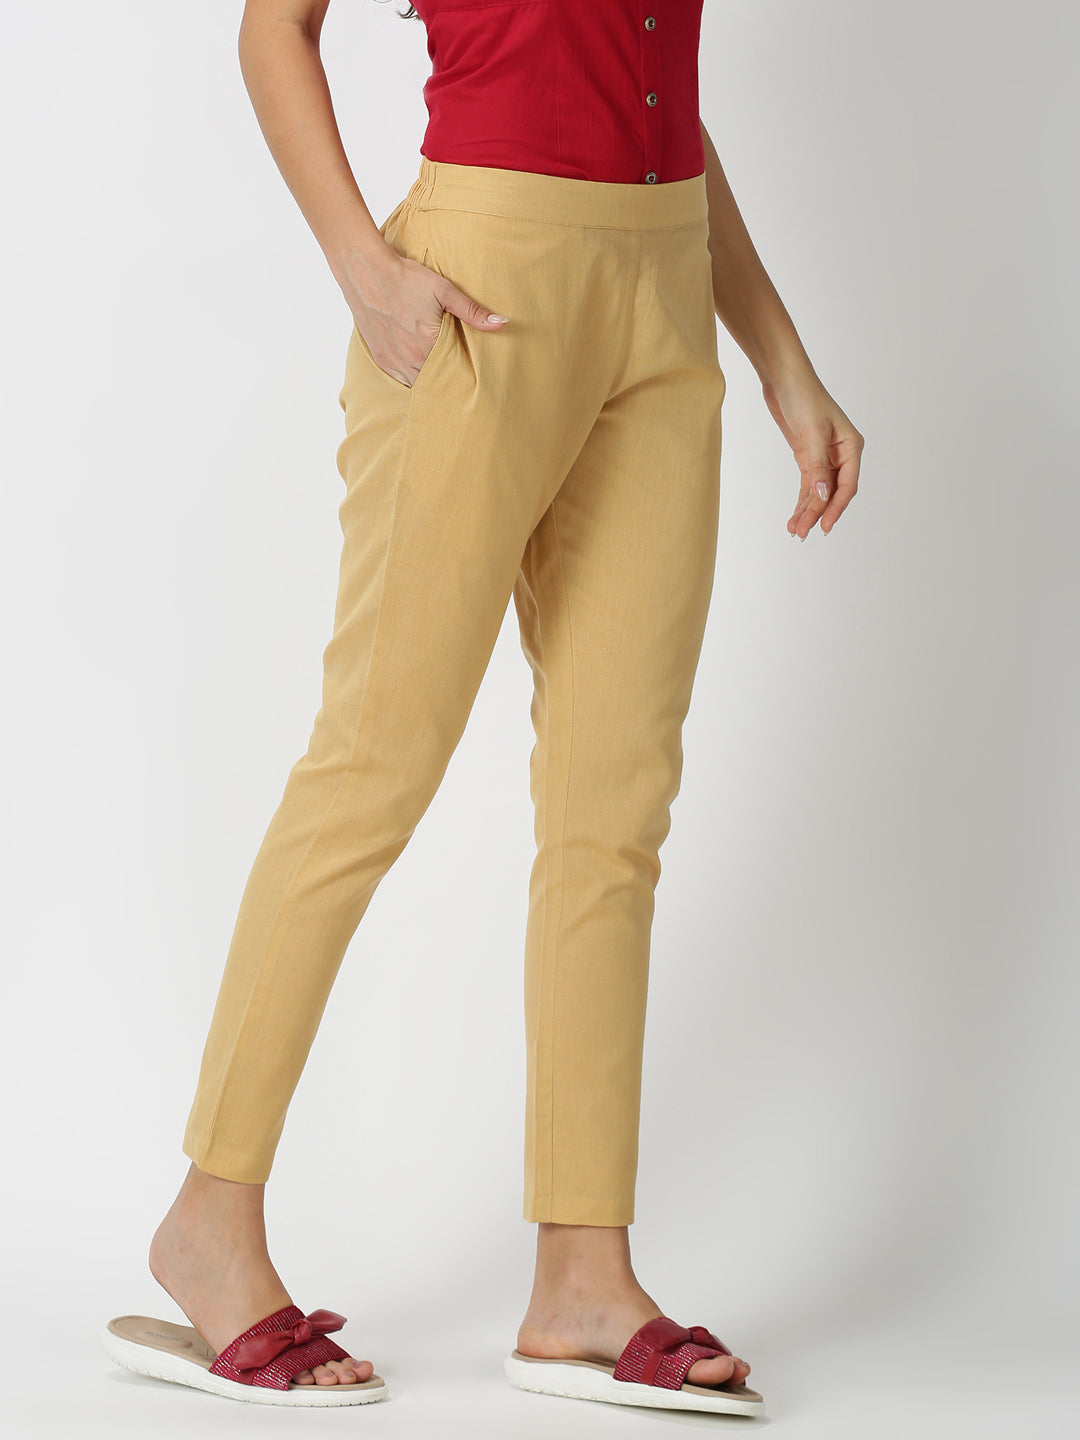 Beige Cotton Flax Straight Pant with Side Pocket